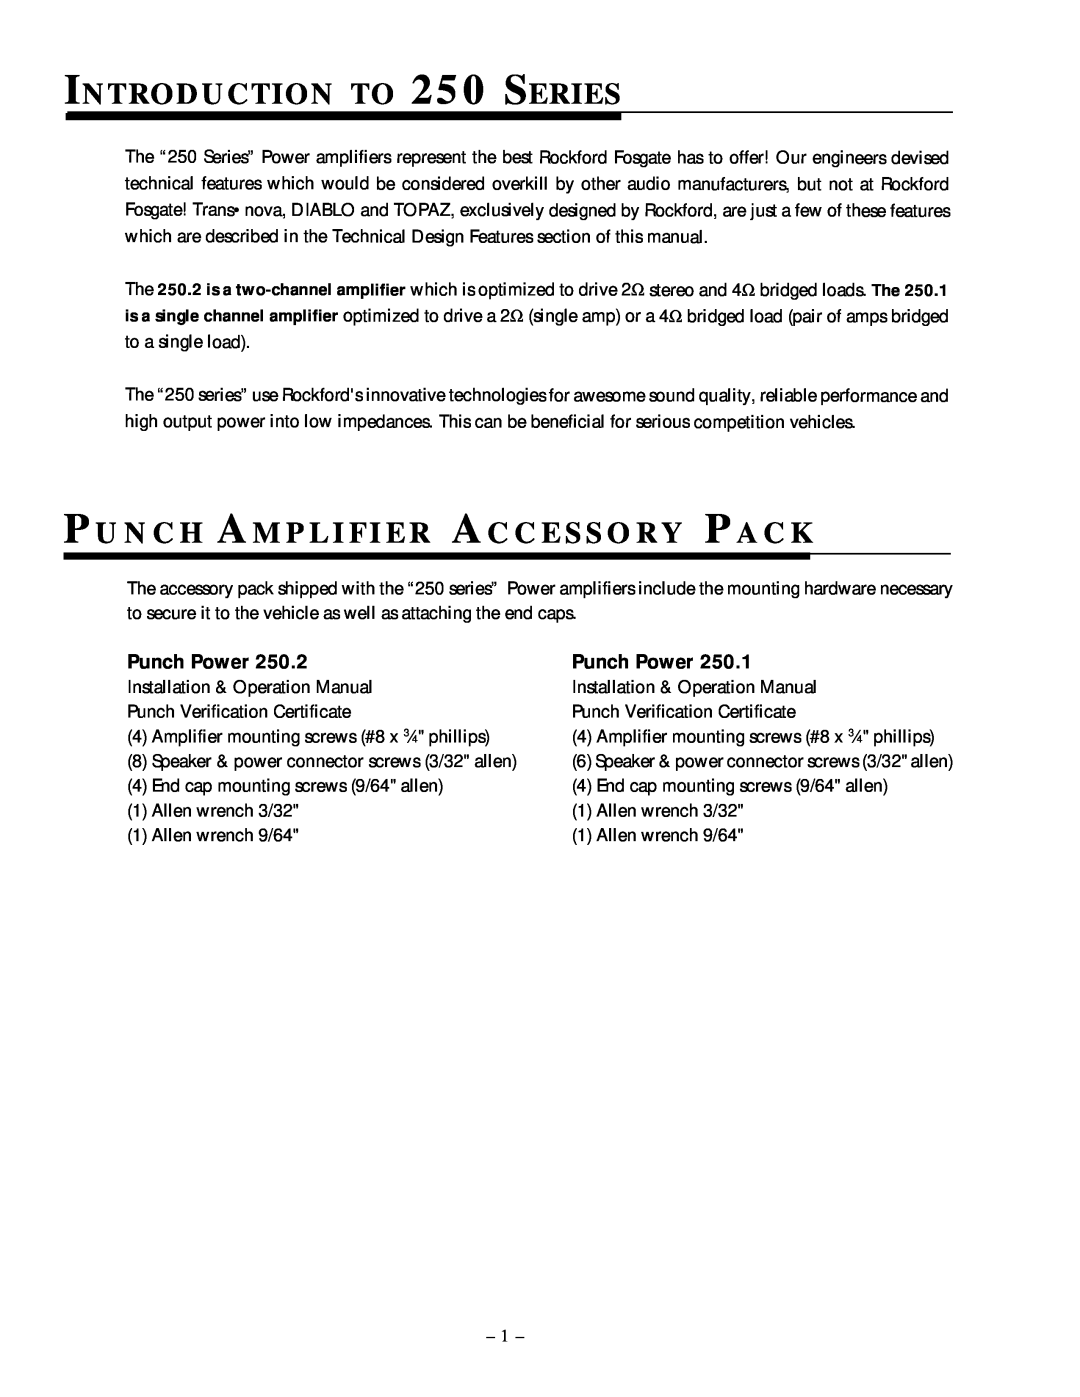 Rockford Fosgate 250.1 manual INTRODUCTION TO 250 SERIES, Punch Power 